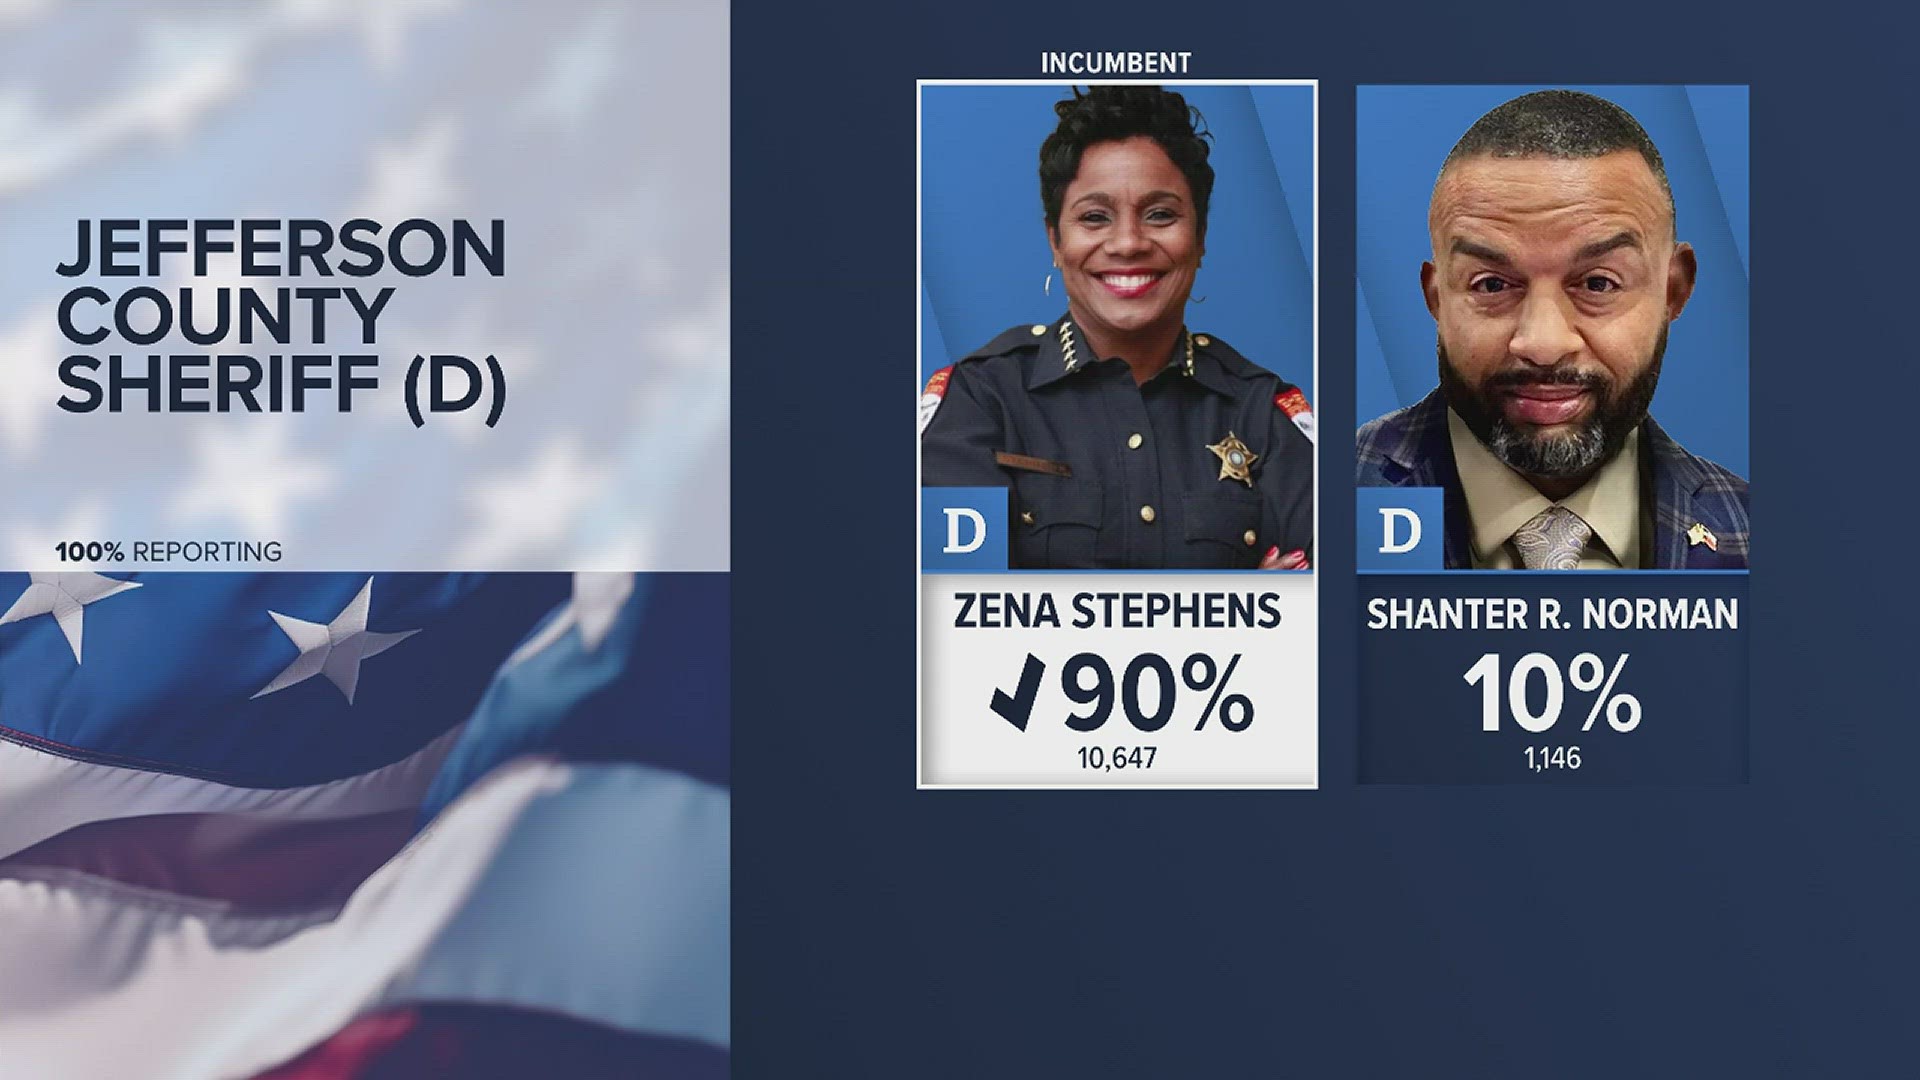 Stephens took home 90% of the votes